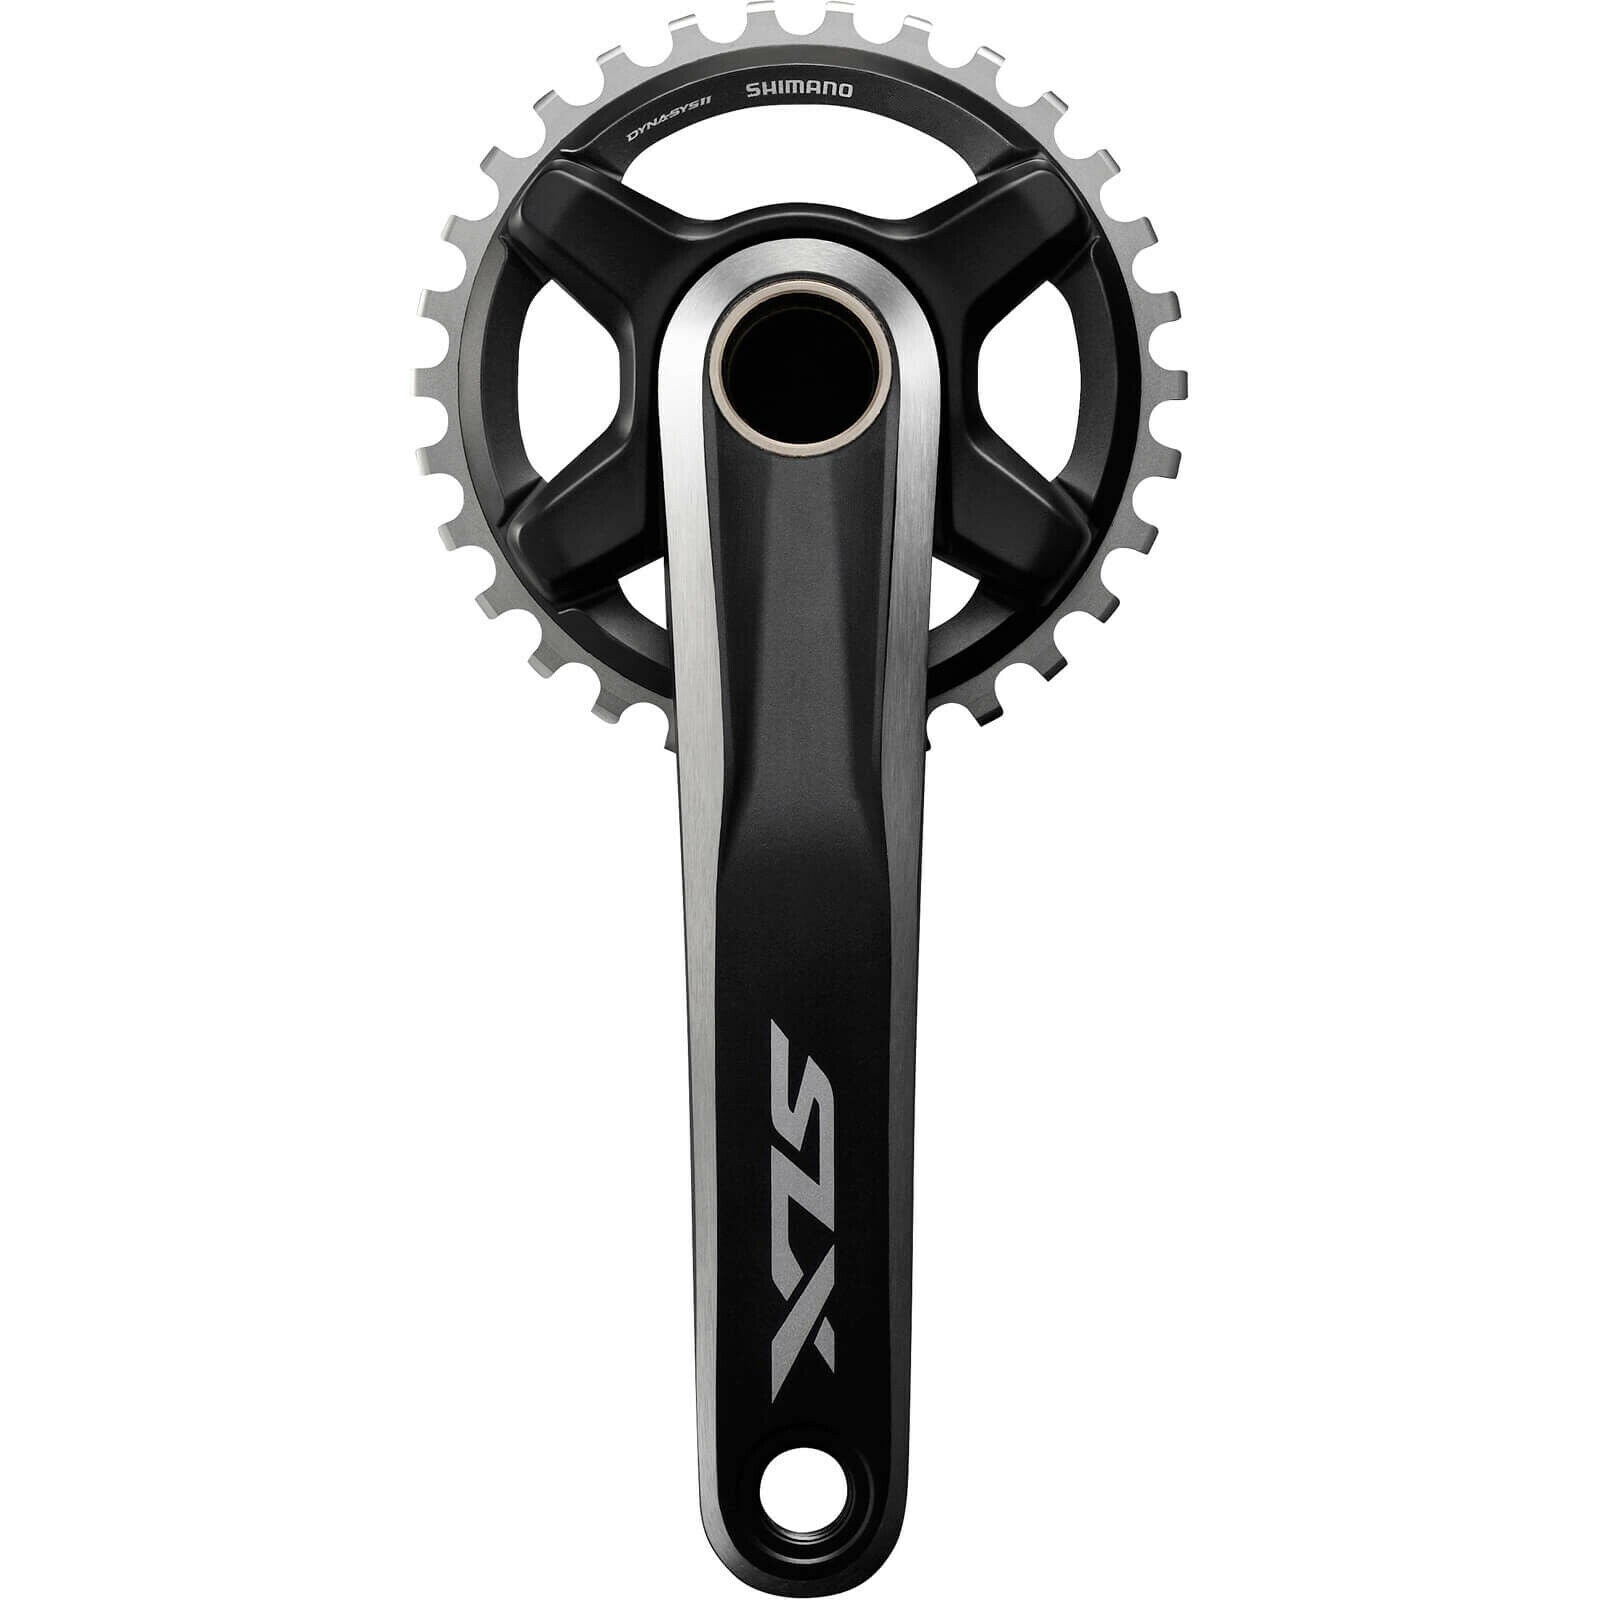 Shimano FC-M7000 SLX 1 x 11 Speed Chainset- 34T - 170mm Arm Right hand side only - Sportandleisure.com (6968172544154)